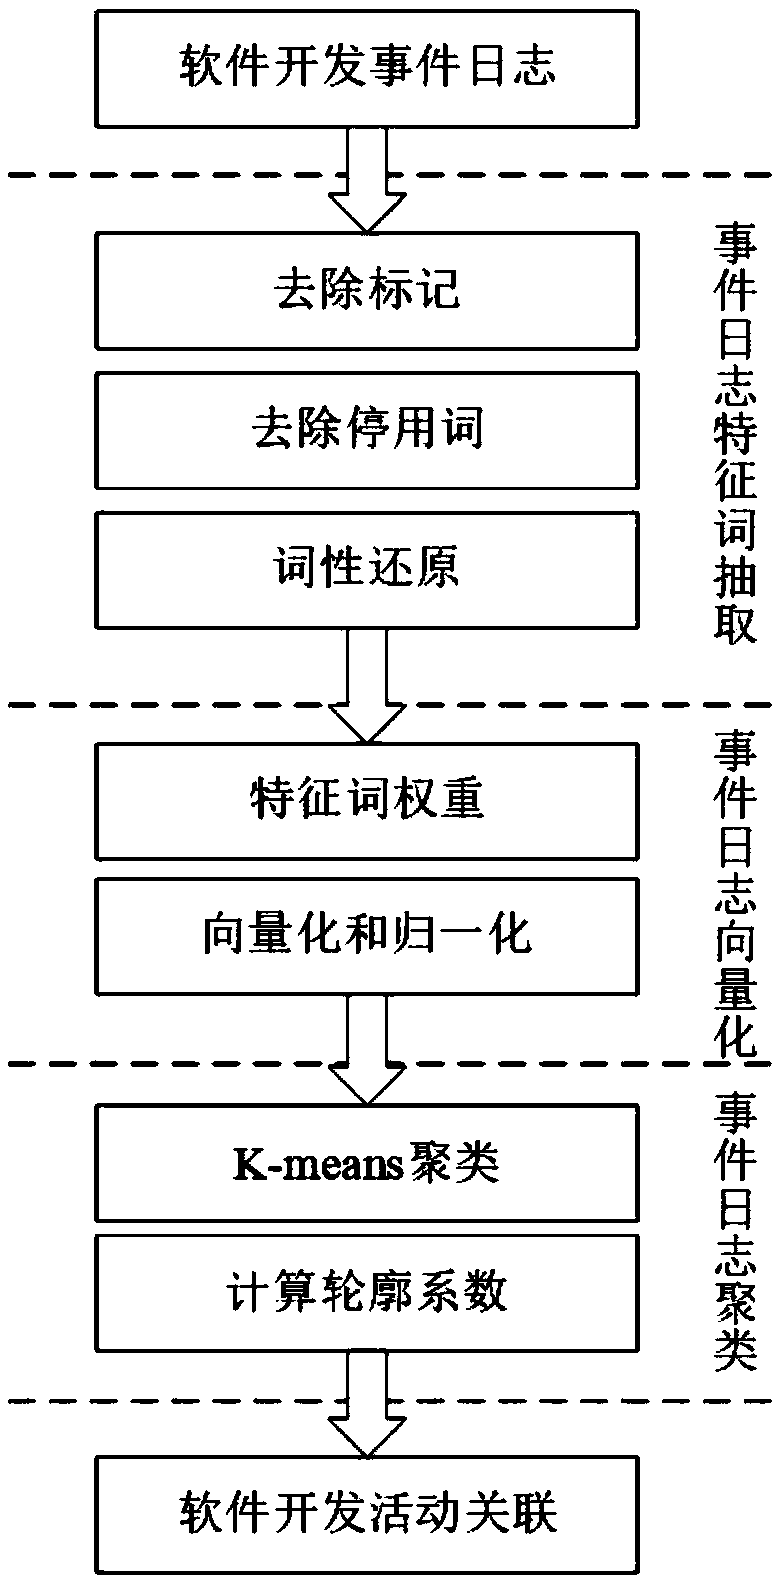 Software development activity clustering analysis method based on event logs